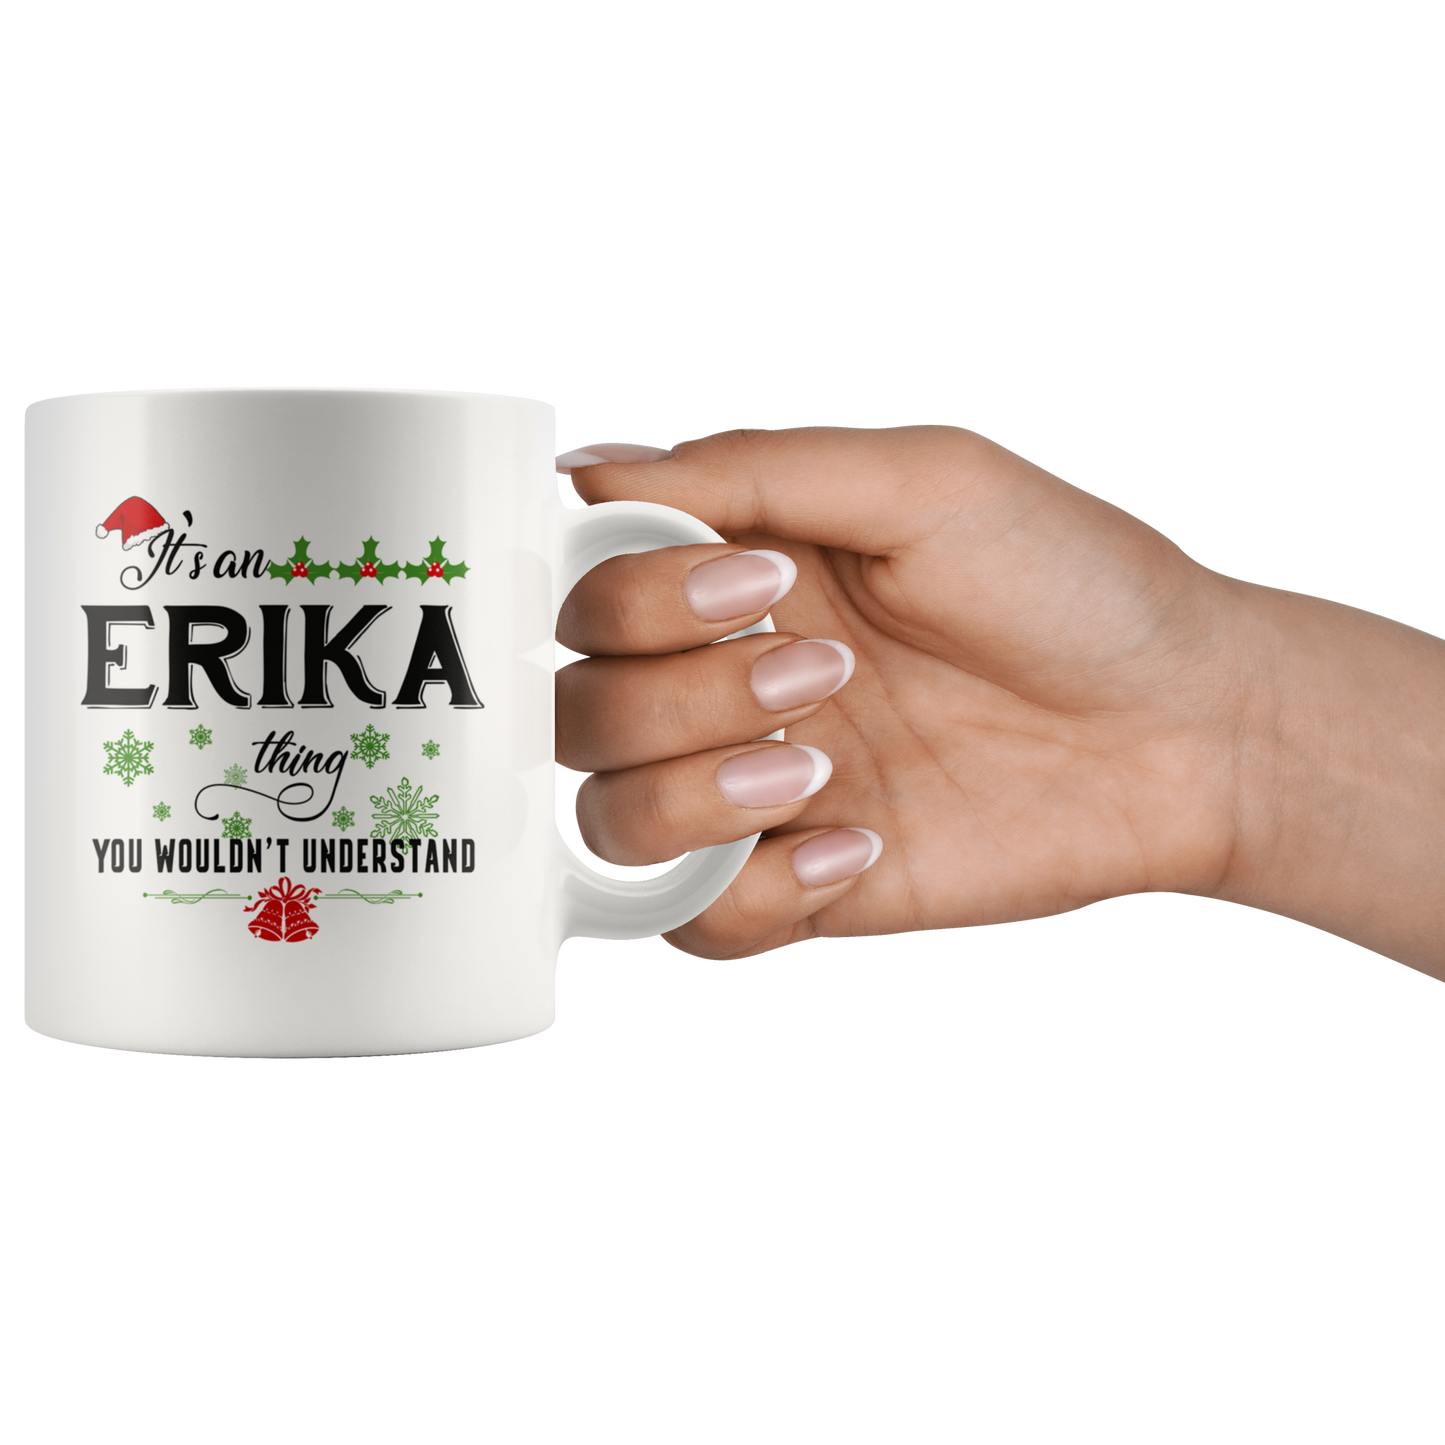 M-20321591-sp-17085 - Christmas Mug for Erika- Its an Erika Thing You Wouldnt Unde